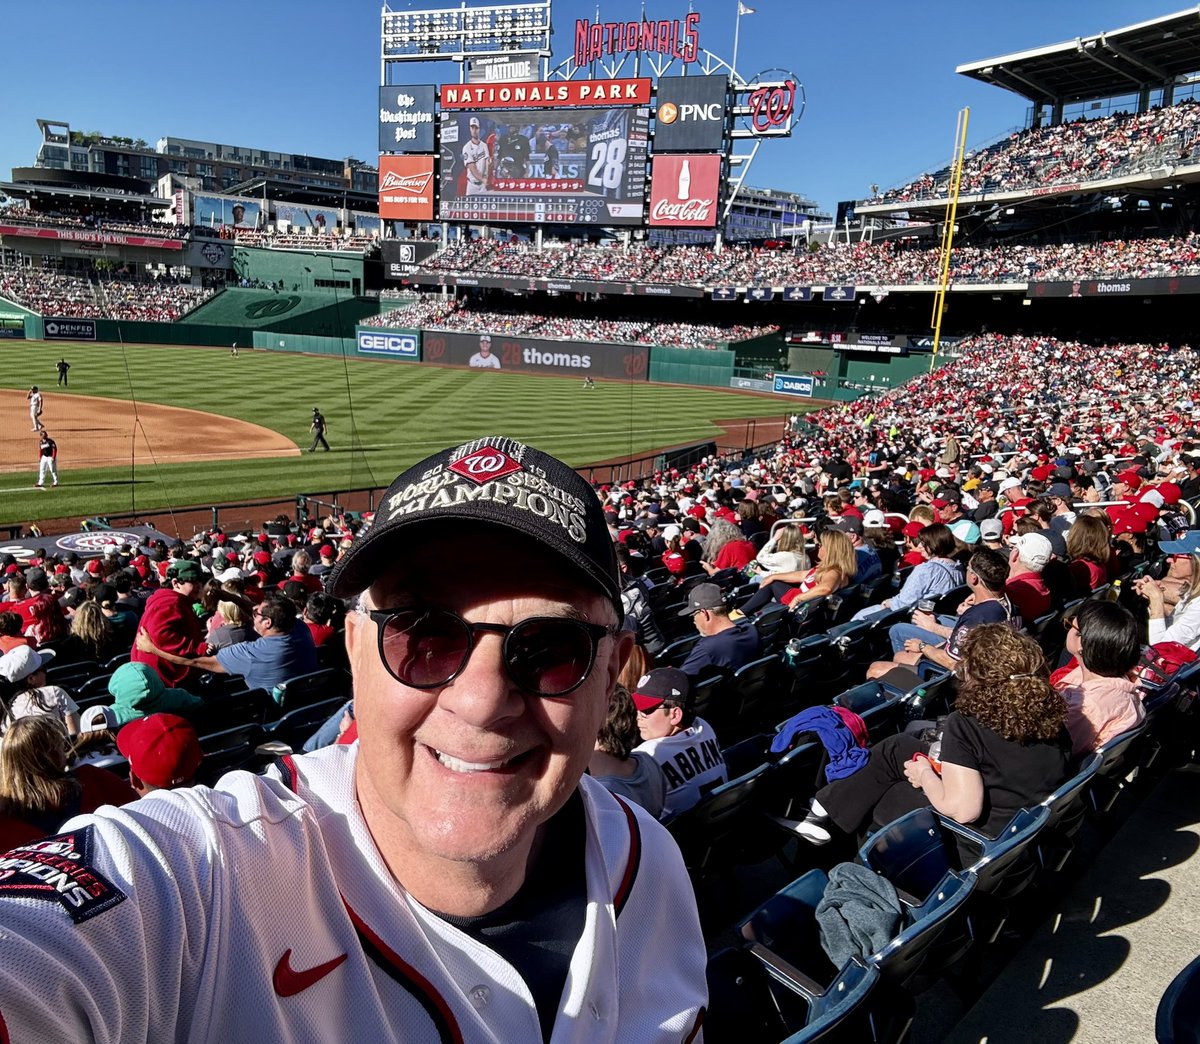 Great day to be at the ballpark. @nationals celebrating their 2019 Championship. And up 2-1 over their opponents then and now - the Astros.